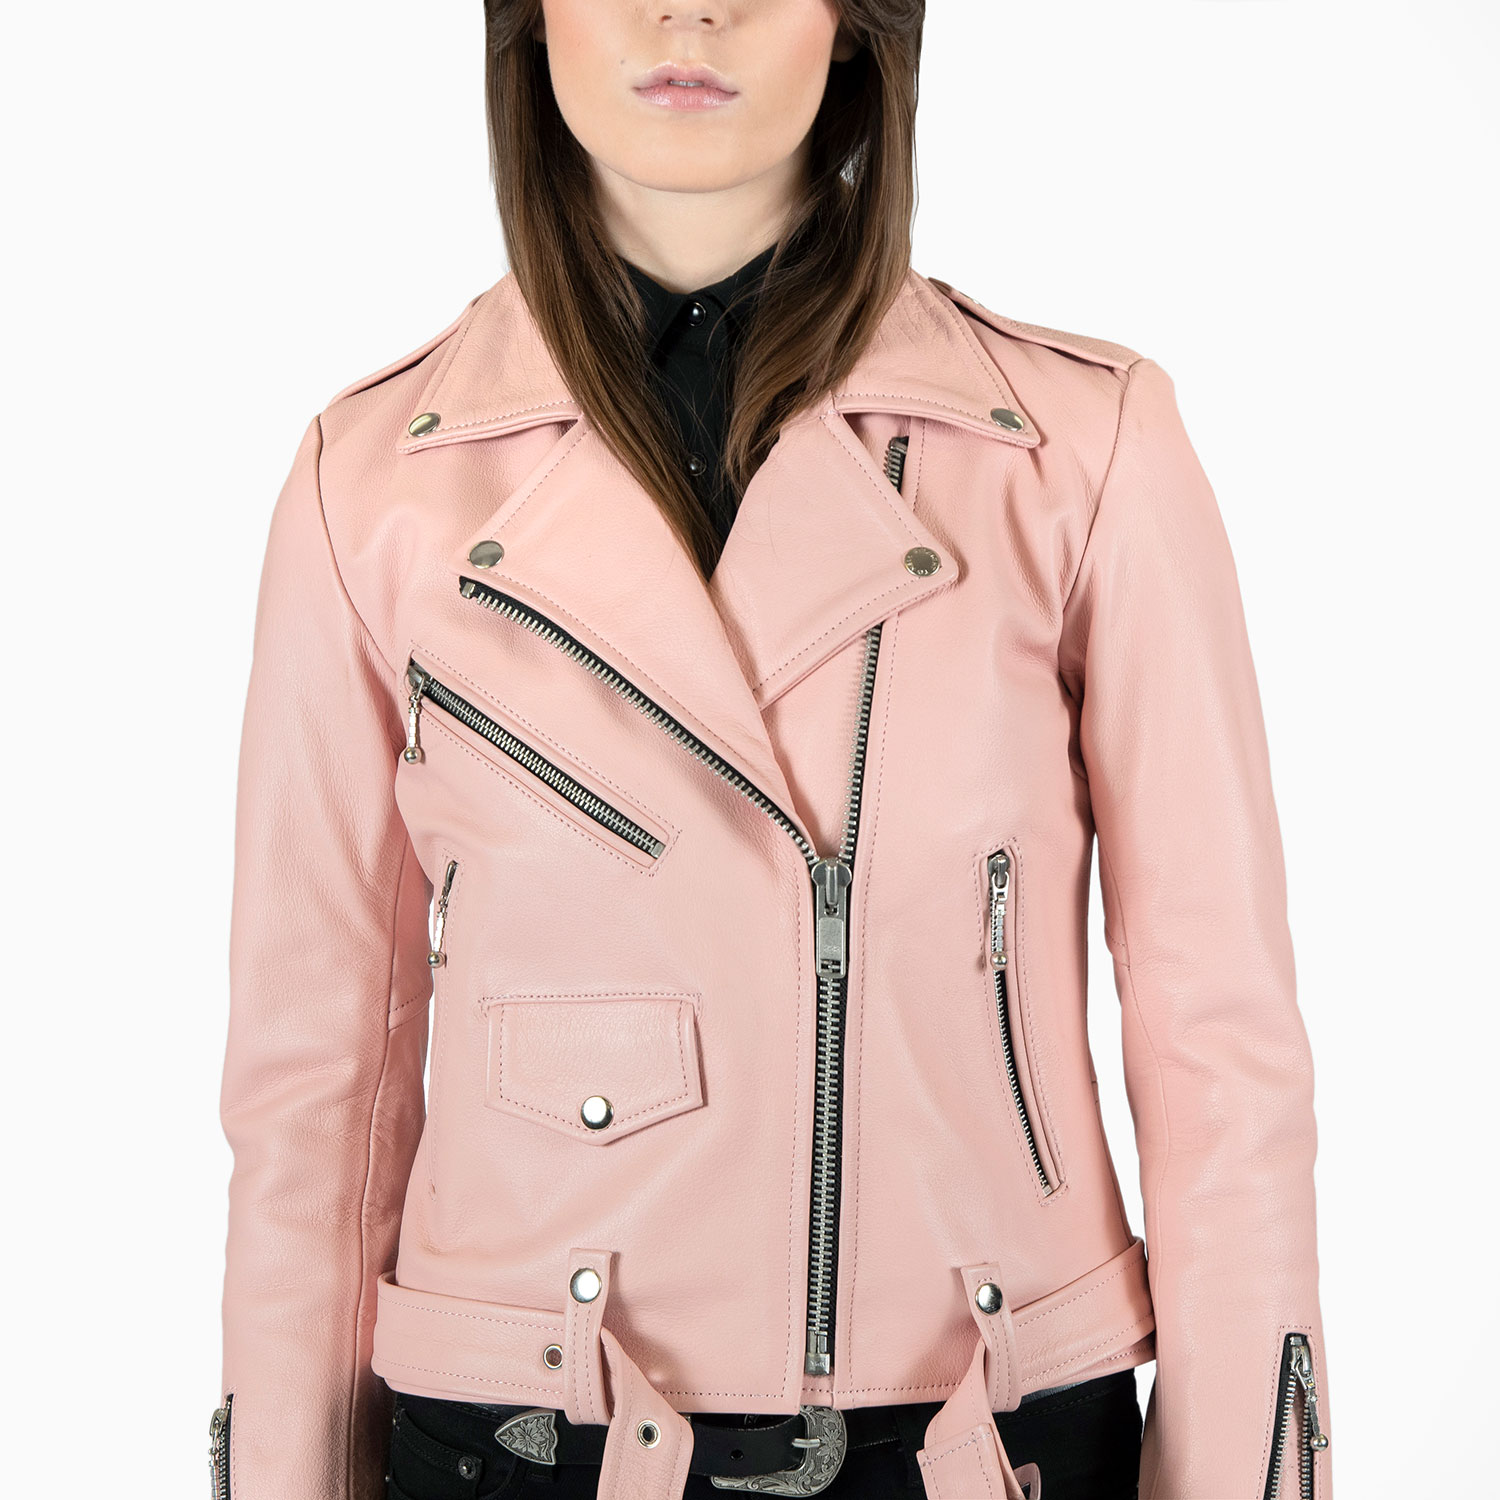 Commando - Dusty Pink Leather Jacket (Size XS, S, M, L, XL, 2XL, 3XL, 4XL)  | Straight To Hell Apparel